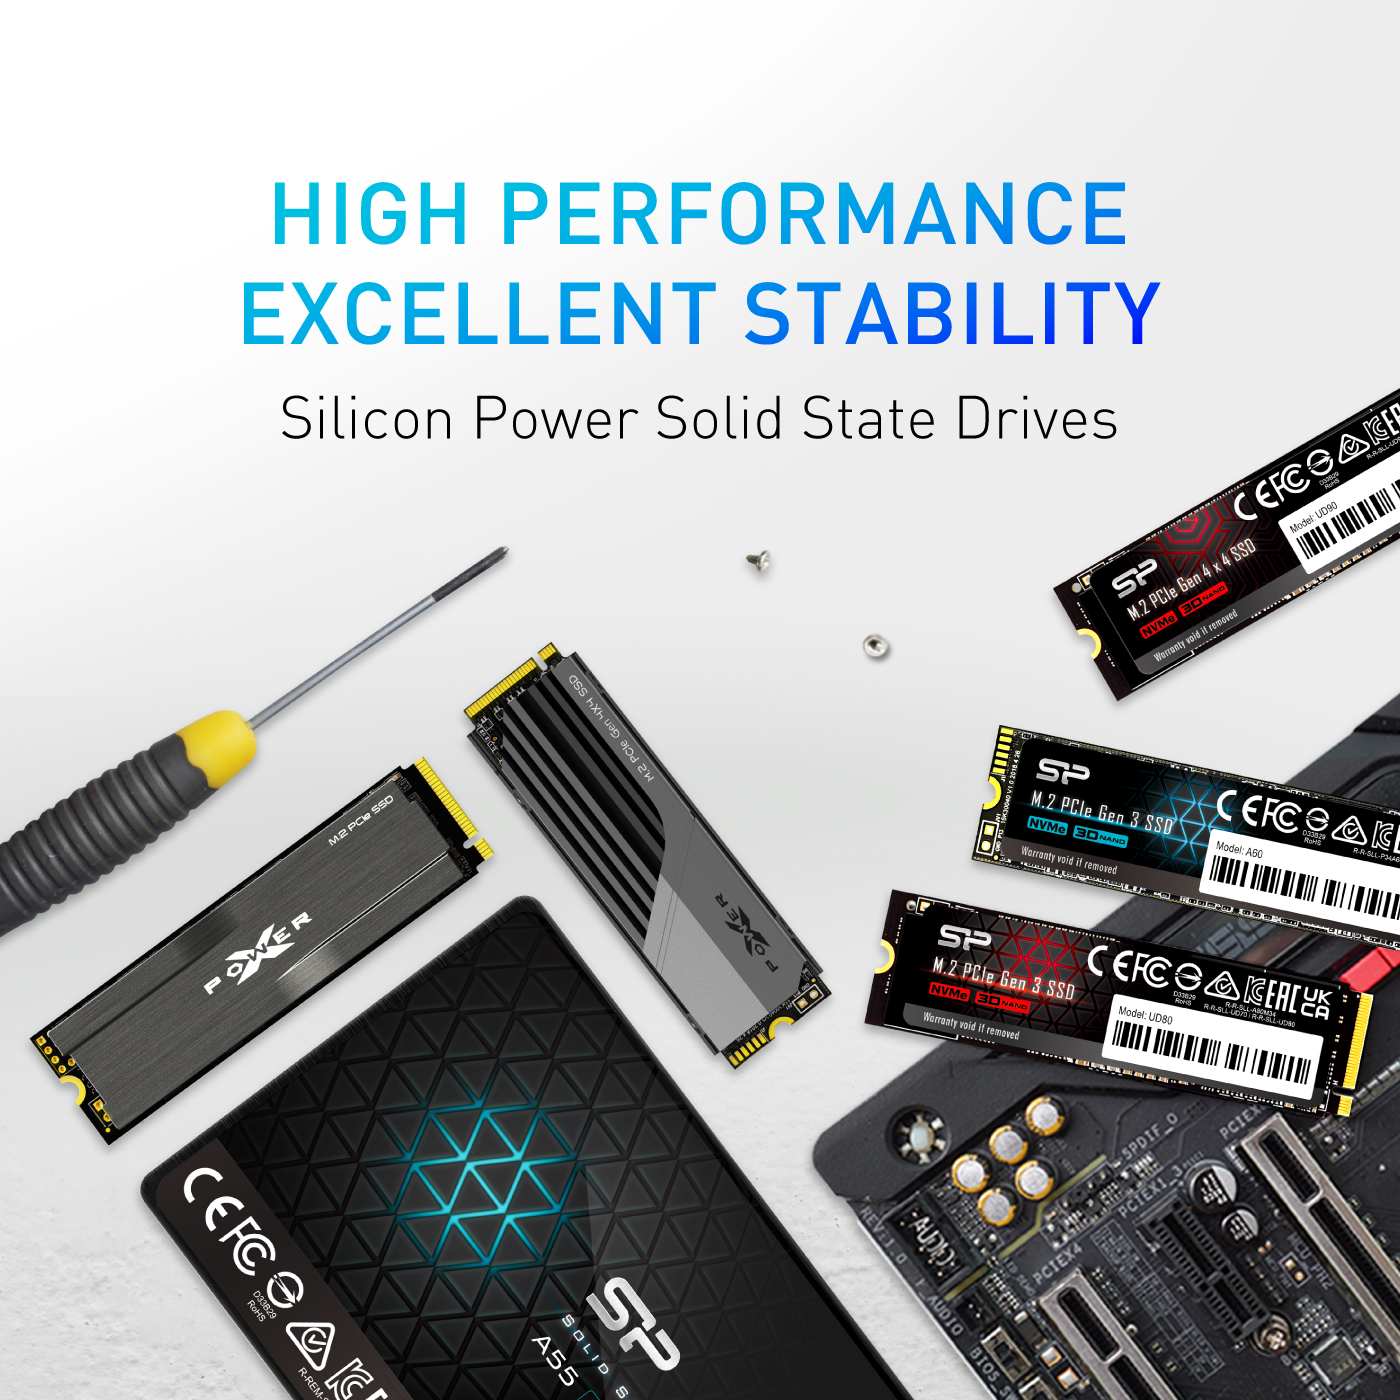 SSD-Hard-Drives-Silicon-Power-2TB-P34A60-Gen3x4-TLC-R-W-up-to-2-200-1-600-MB-s-PCIe-M-2-NVMe-SSD-11